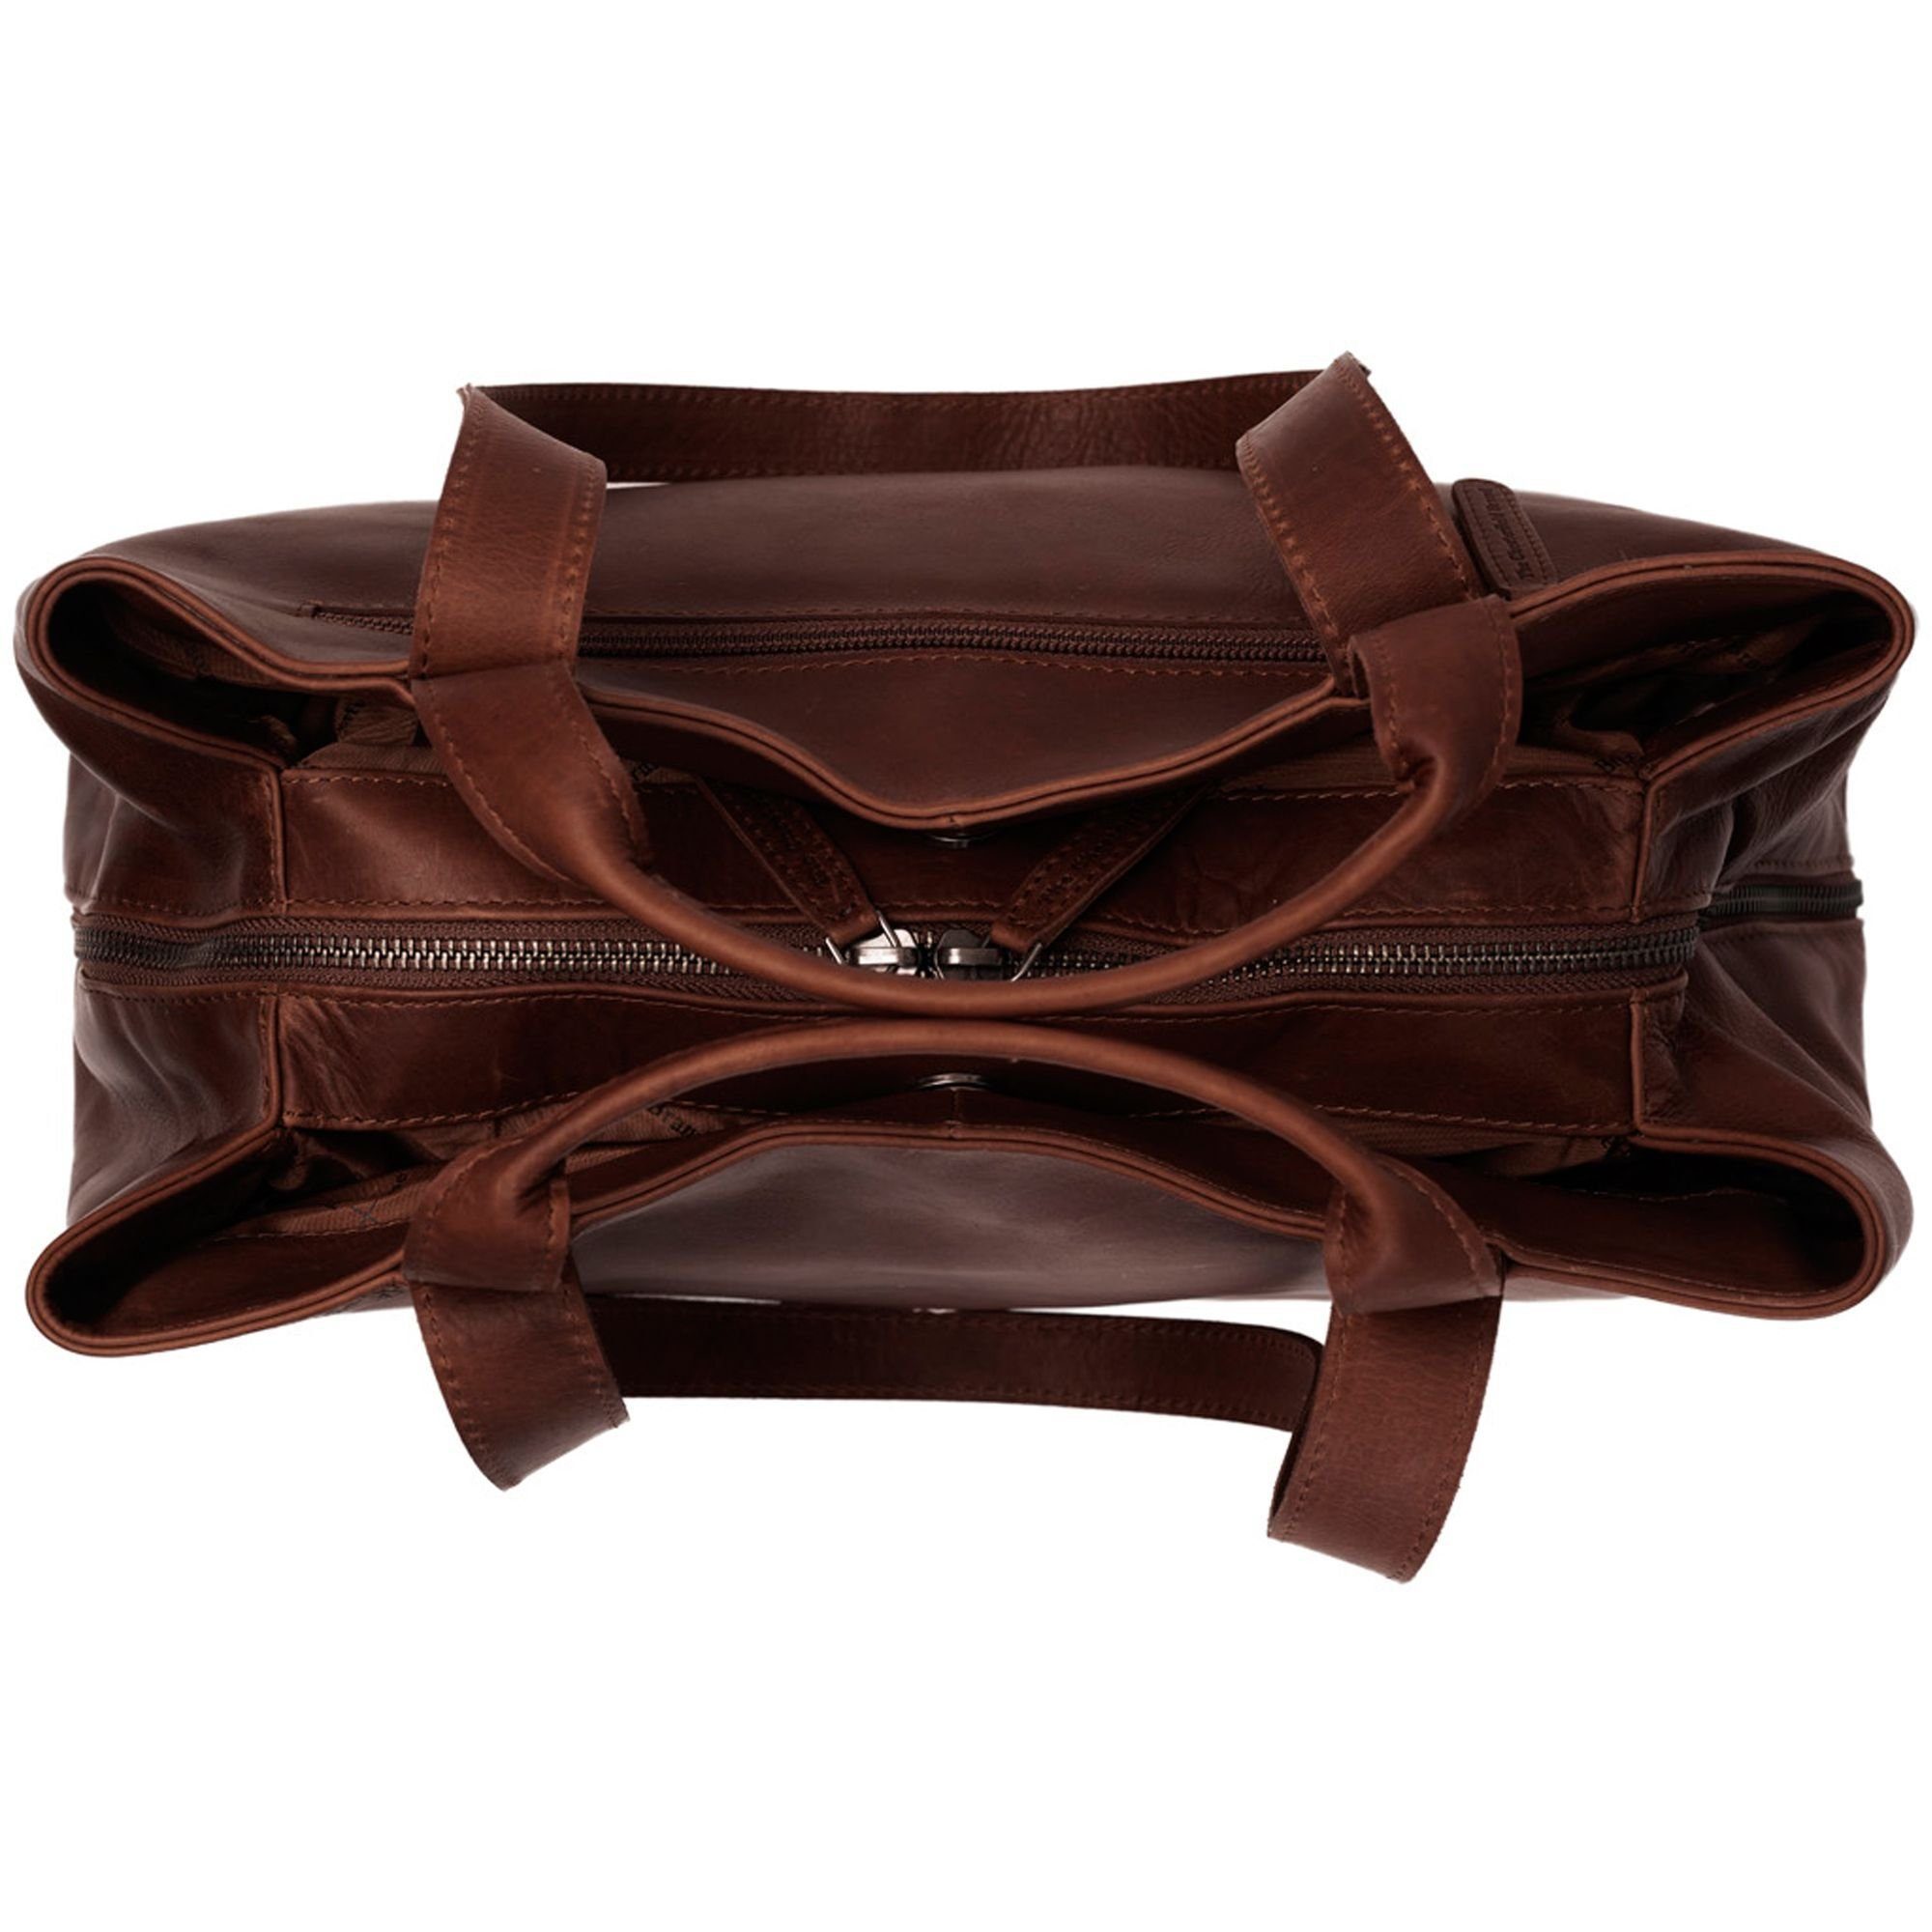 Up, The Schultertasche Brand Pull Chesterfield Leder Wax brown